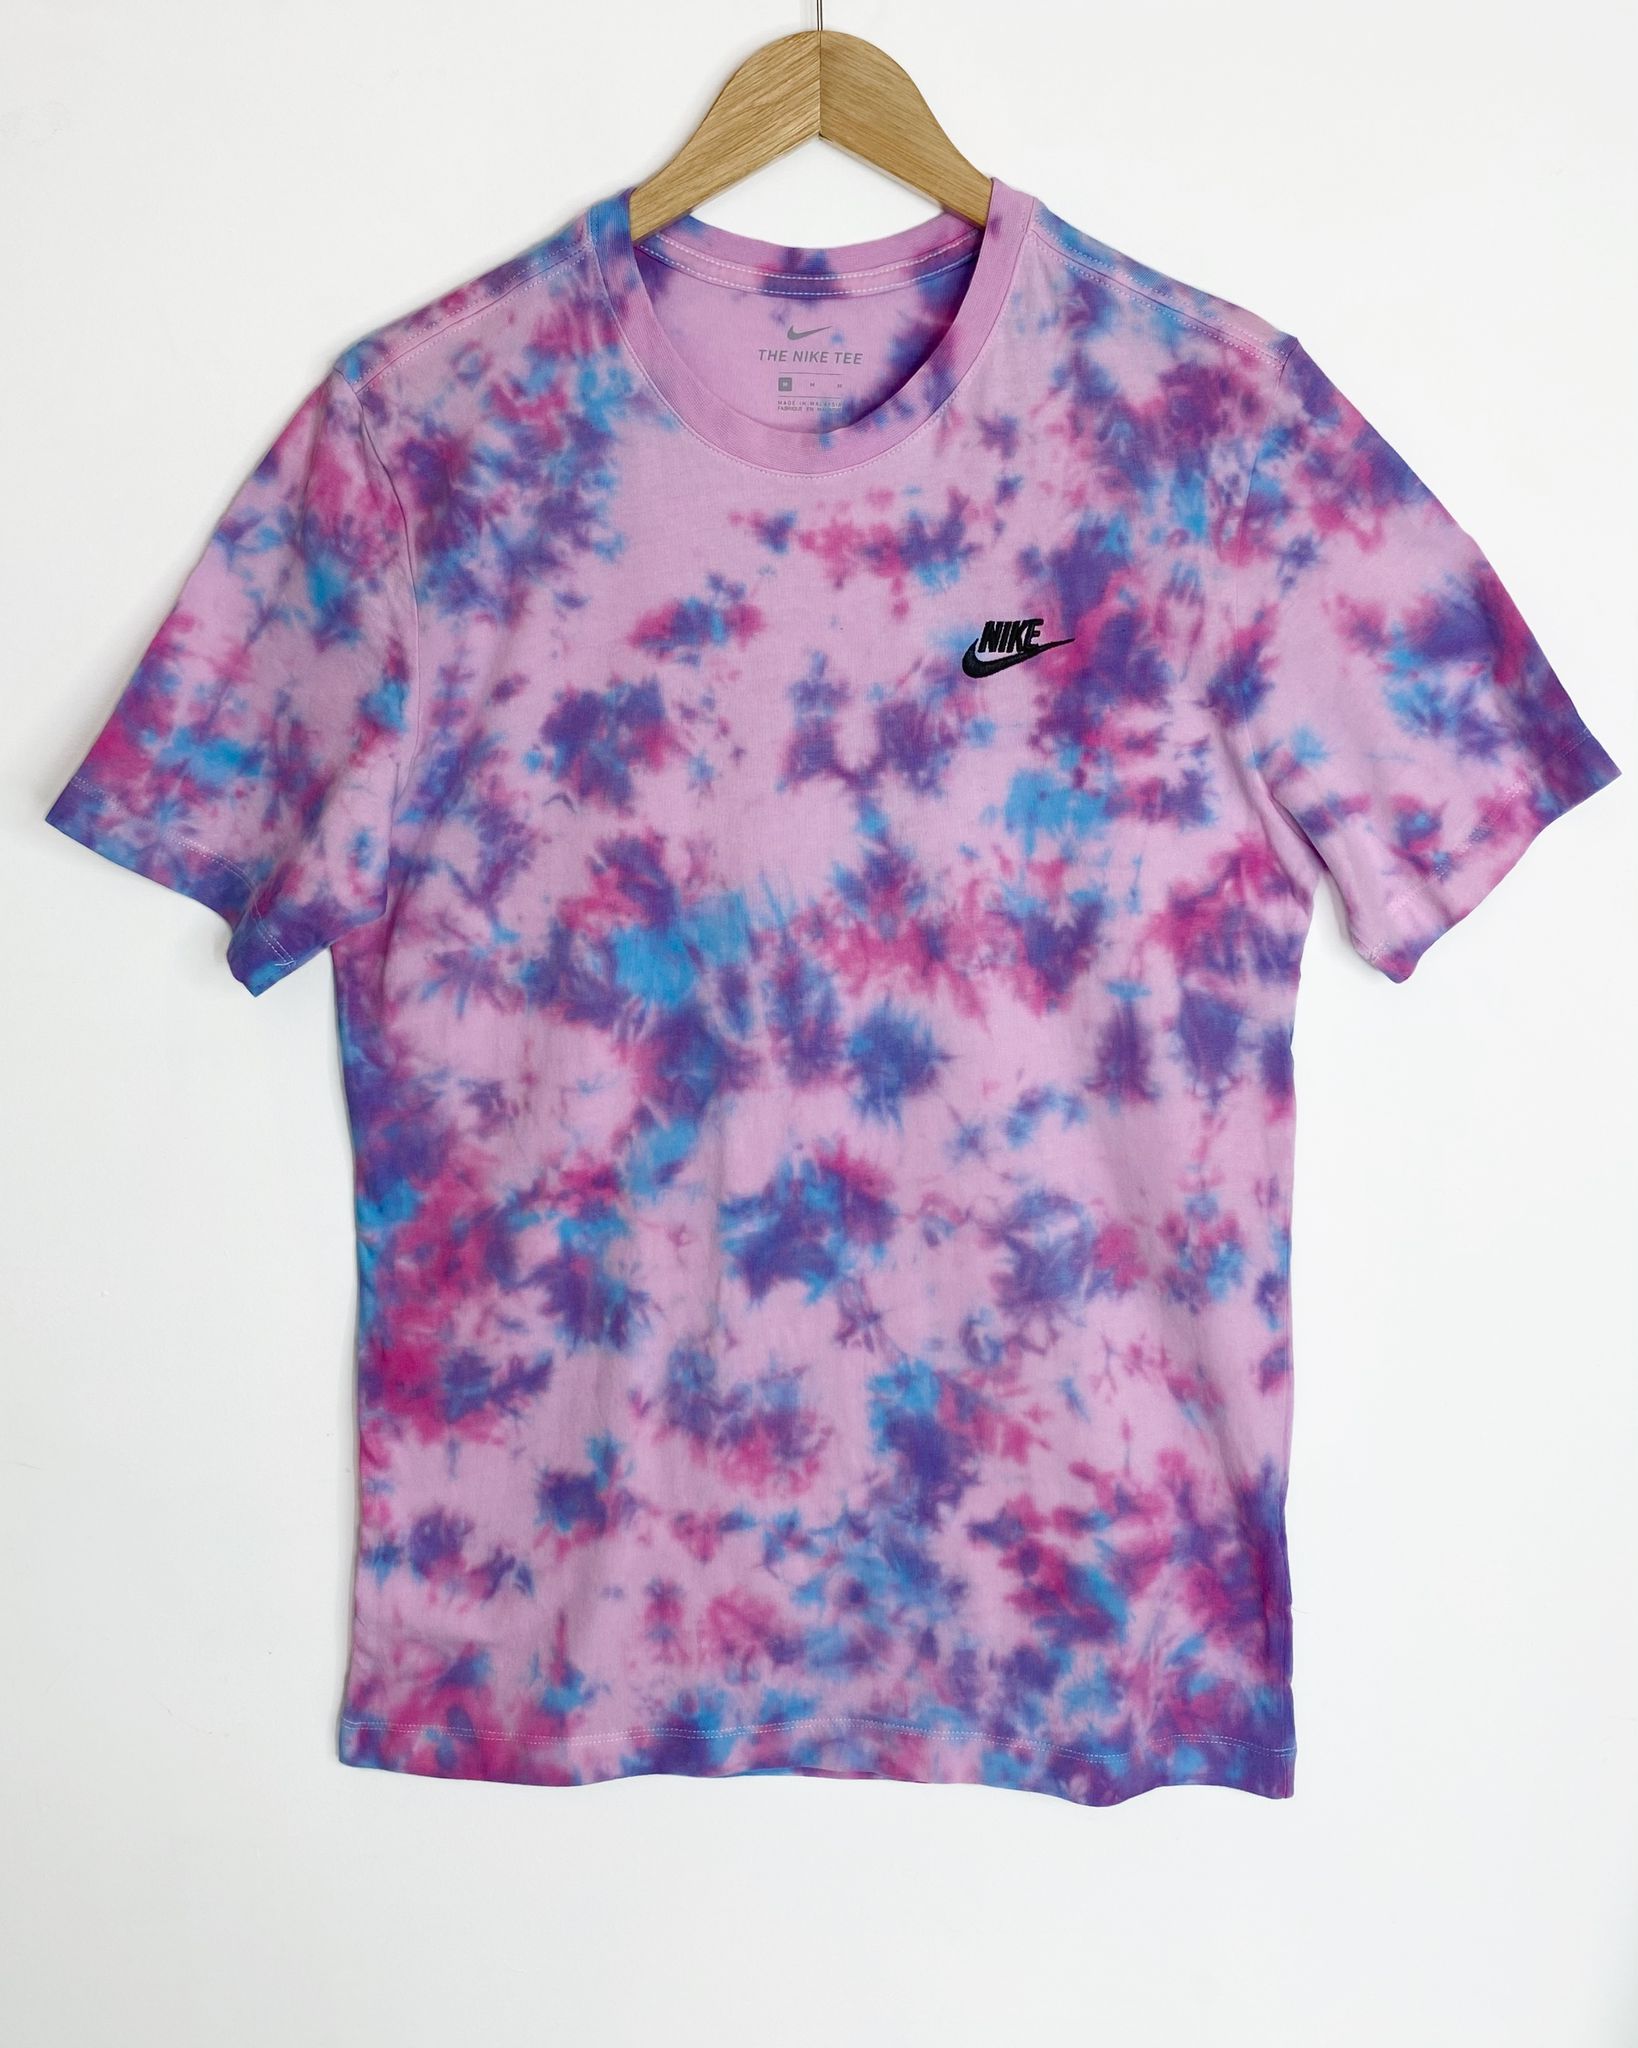 Colorful Unicorn mix colors tie dye adds a unique touch to this 100% authentic Nike tee.